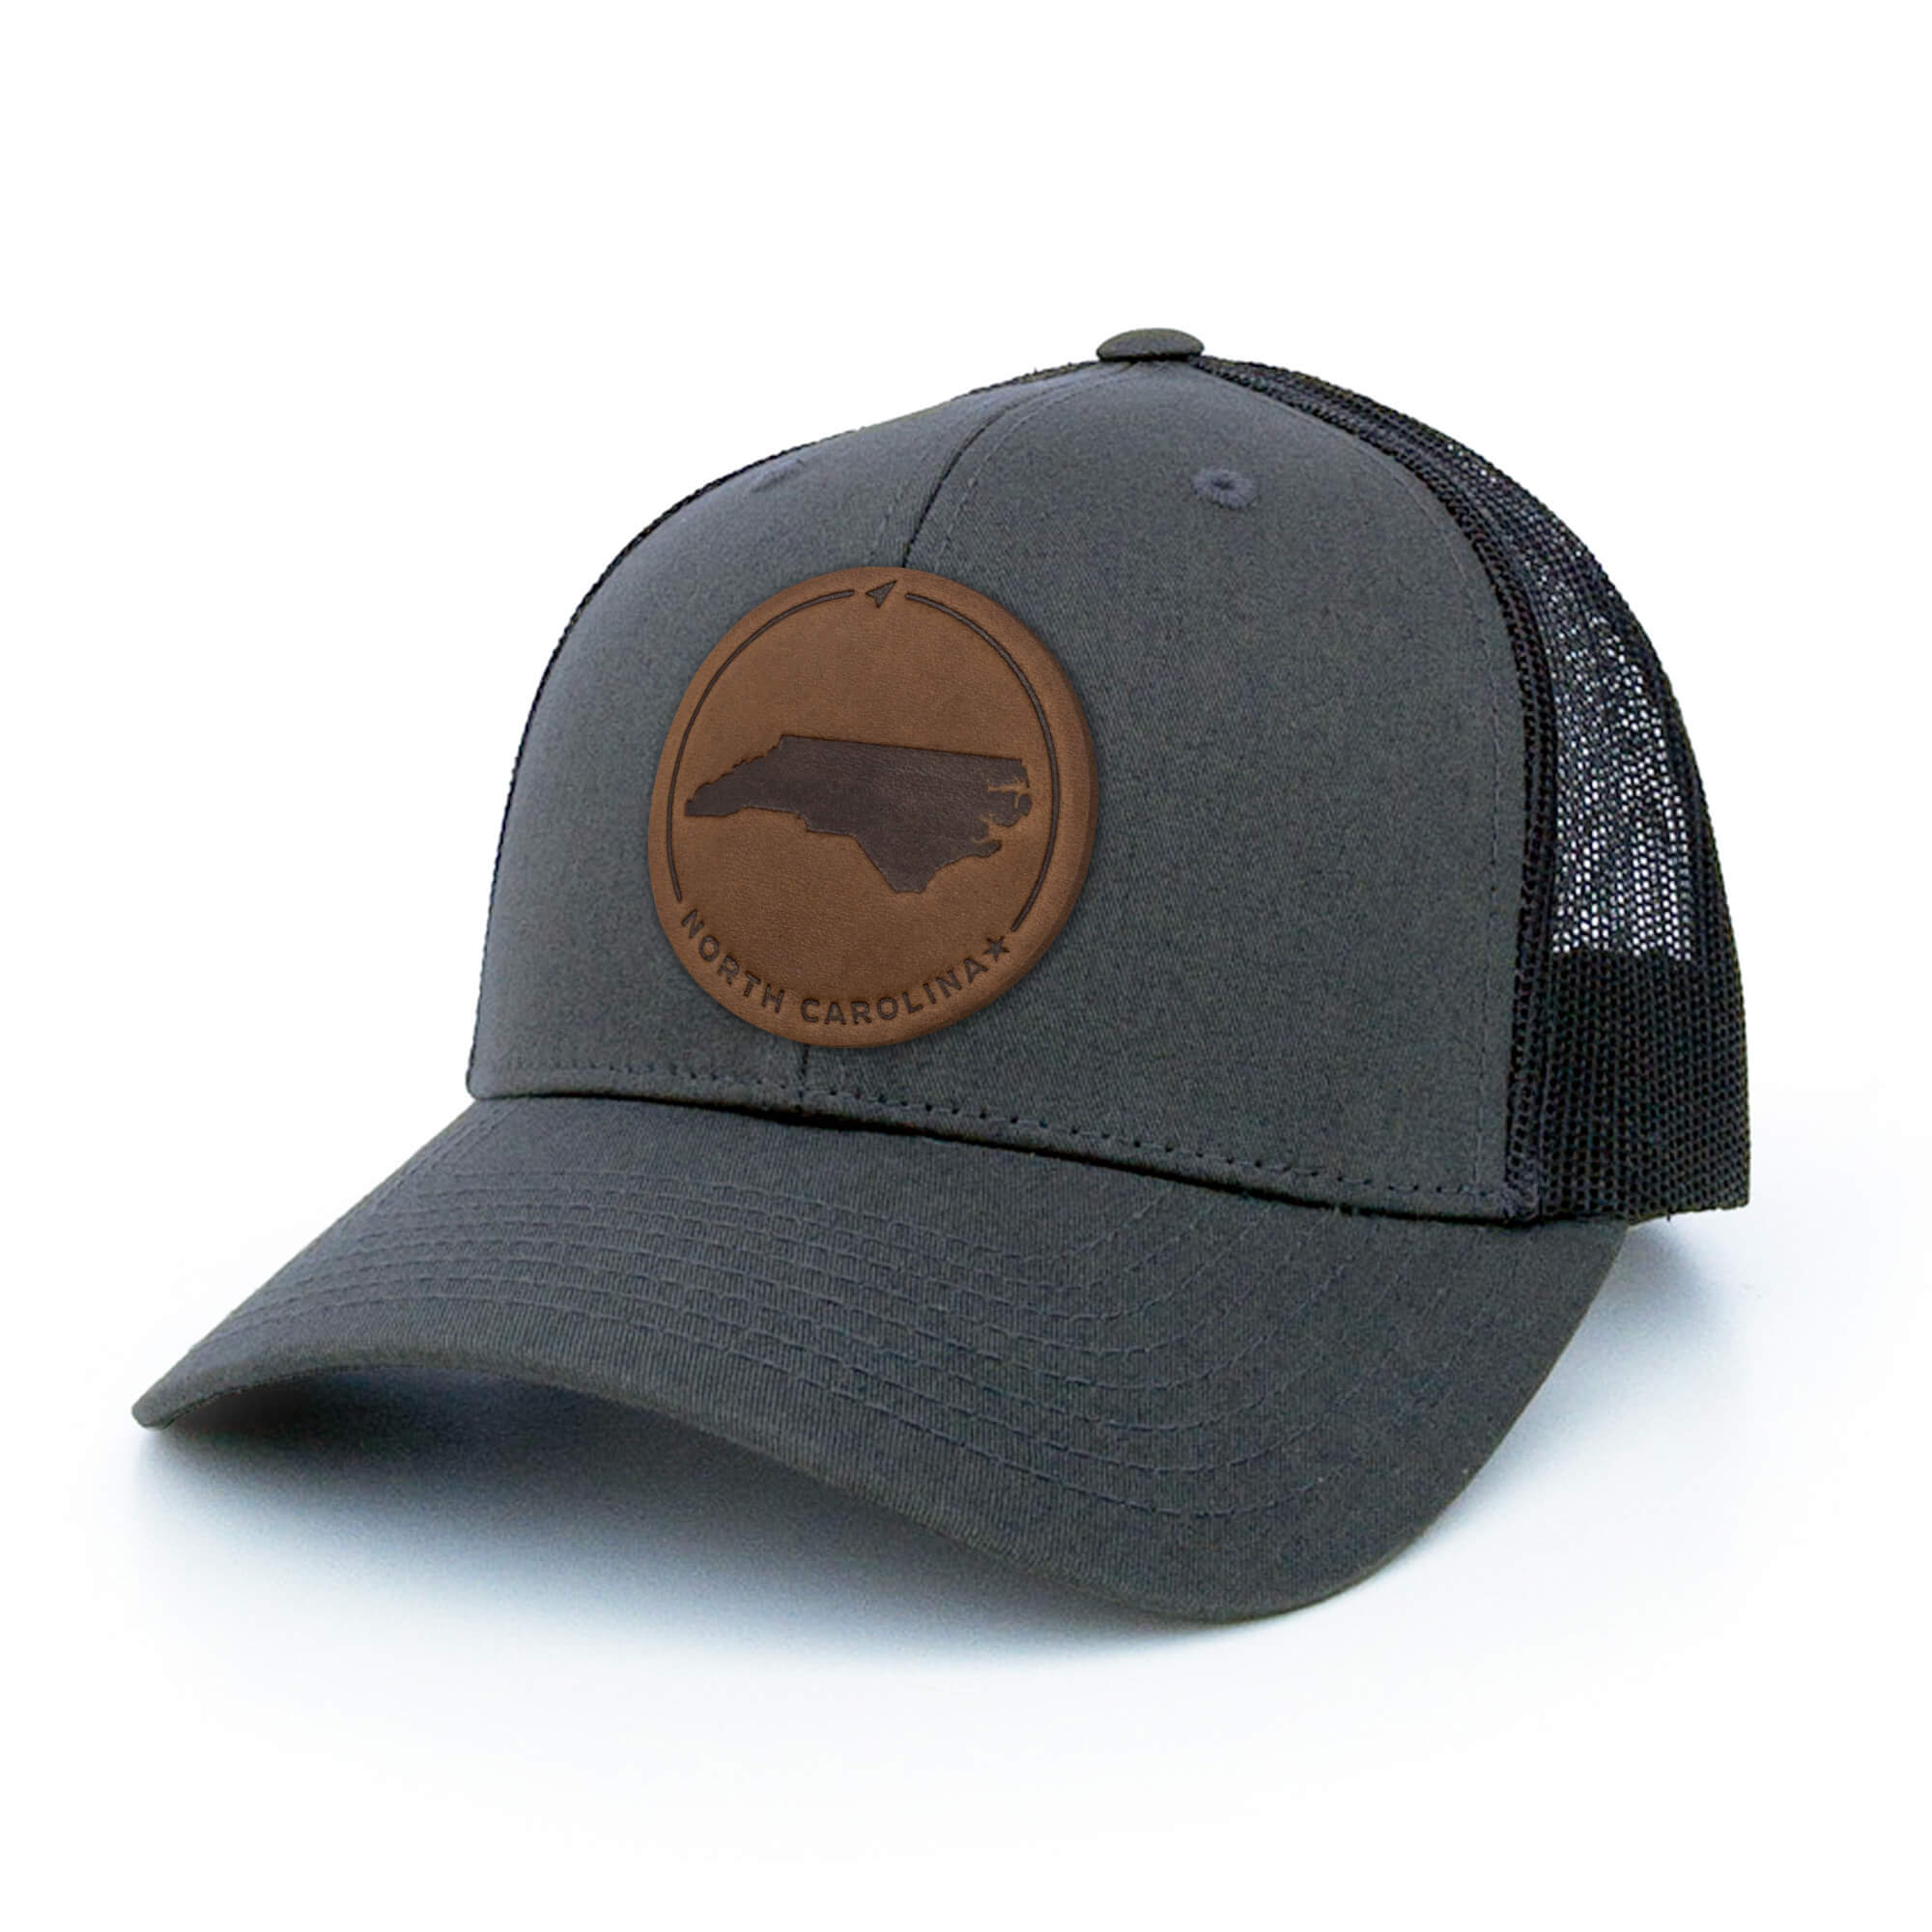 Charcoal trucker hat with full-grain leather patch of North Carolina | BLACK-003-005, CHARC-003-005, NAVY-003-005, HGREY-003-005, MOSS-003-005, BROWN-003-005